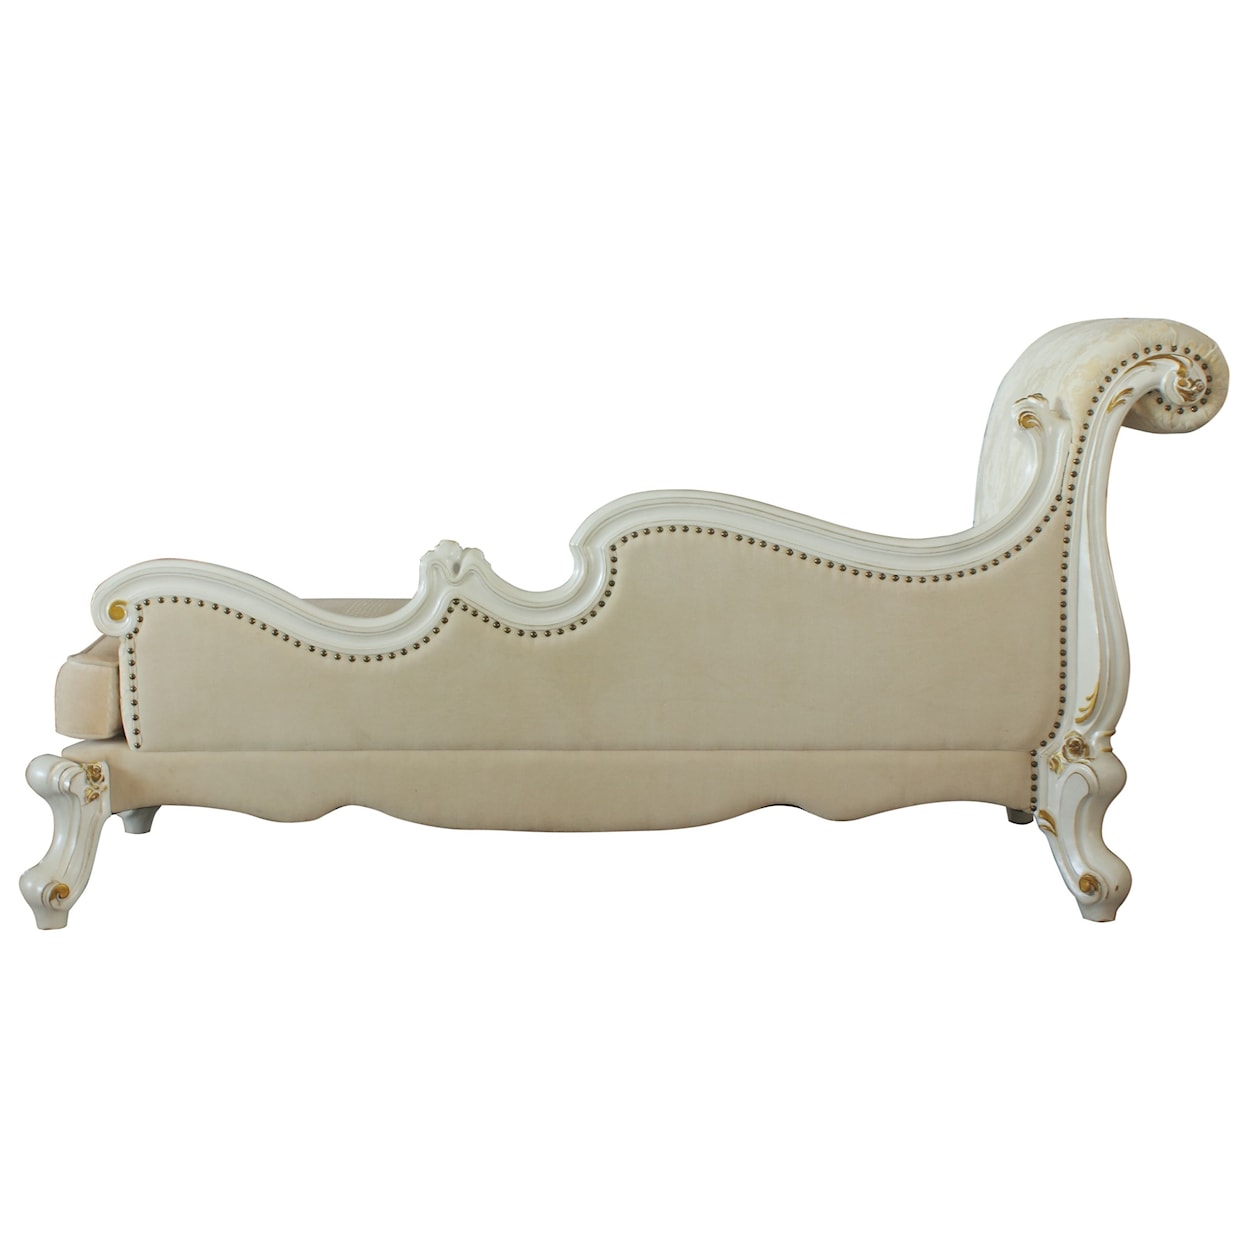 Acme Furniture Picardy Chaise w/ Pillows